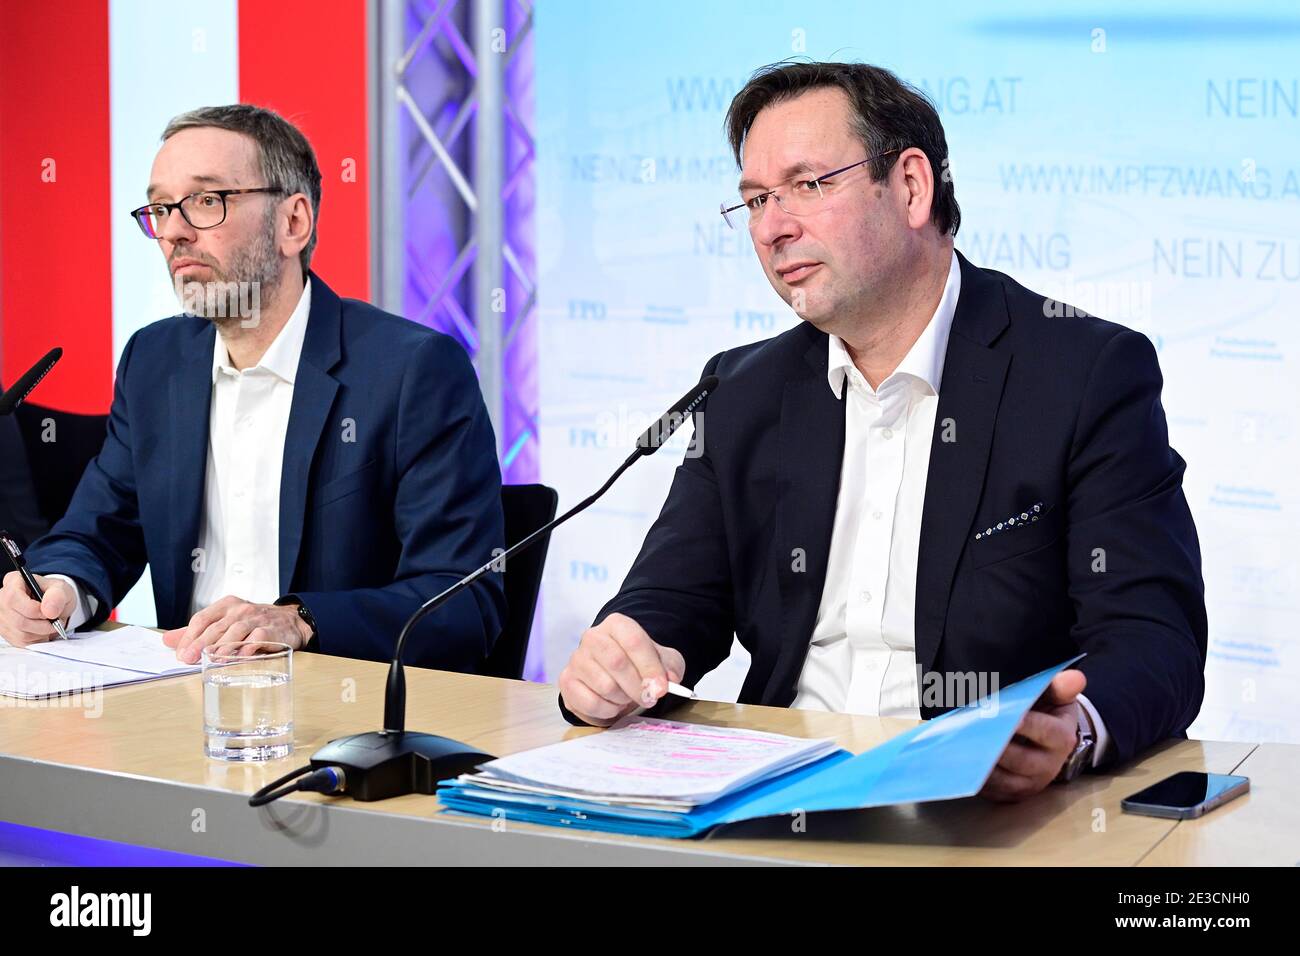 Vienna, Austria. 18th Jan, 2021. Press conference with FPÖ club chairman Herbert Kickl (L) and Education spokesman Hermann Brückl (R). The topics are the corona compulsory measures and the situation at schools. Stock Photo